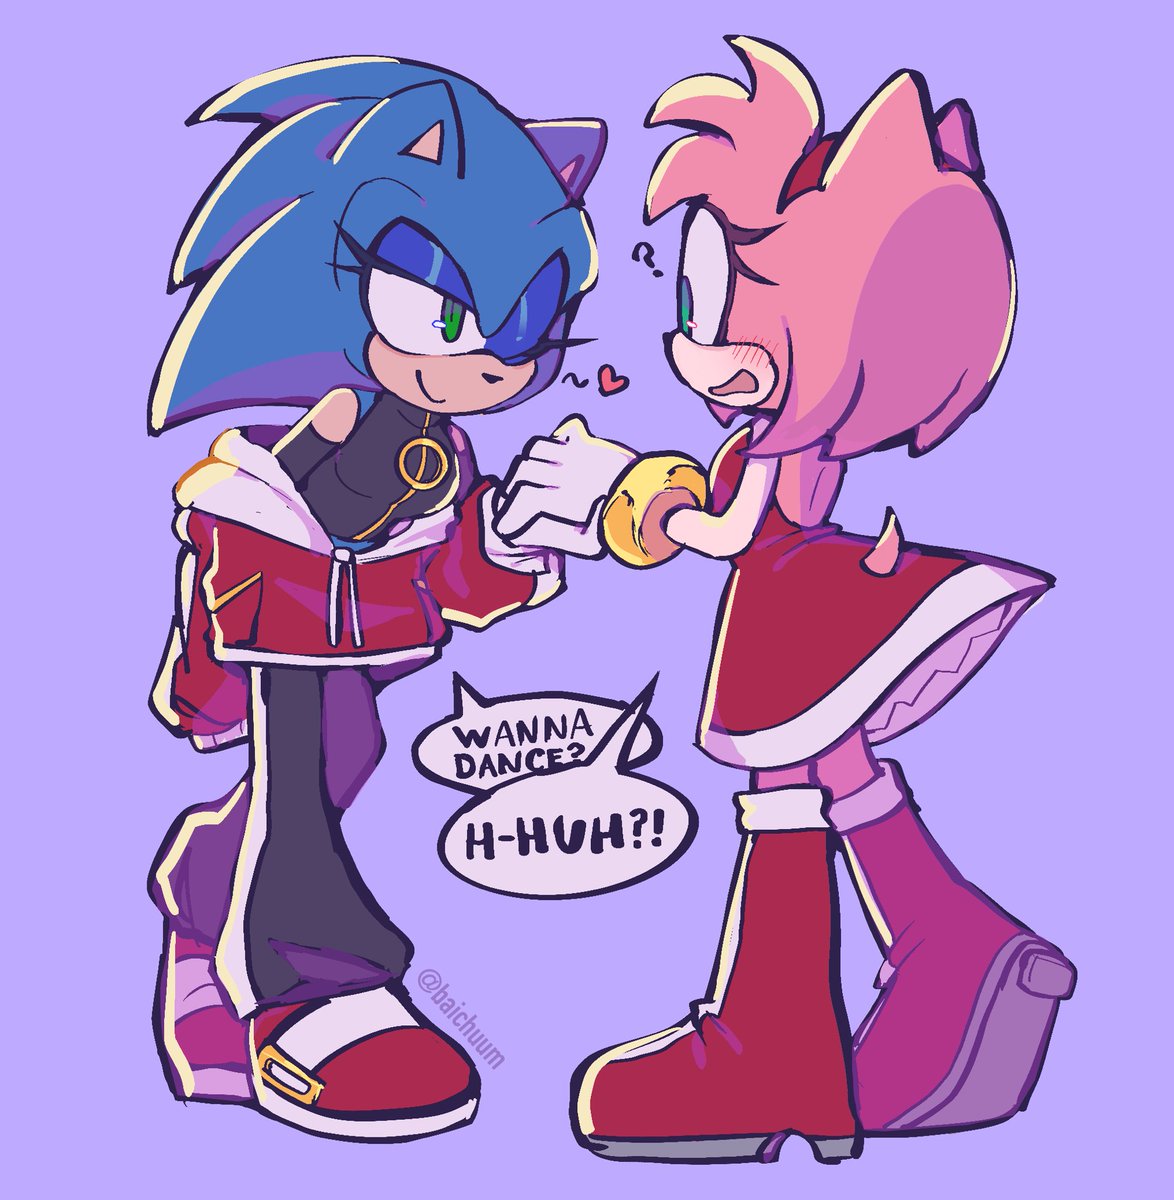 Another one 
#sonamy #amyrose #sonic